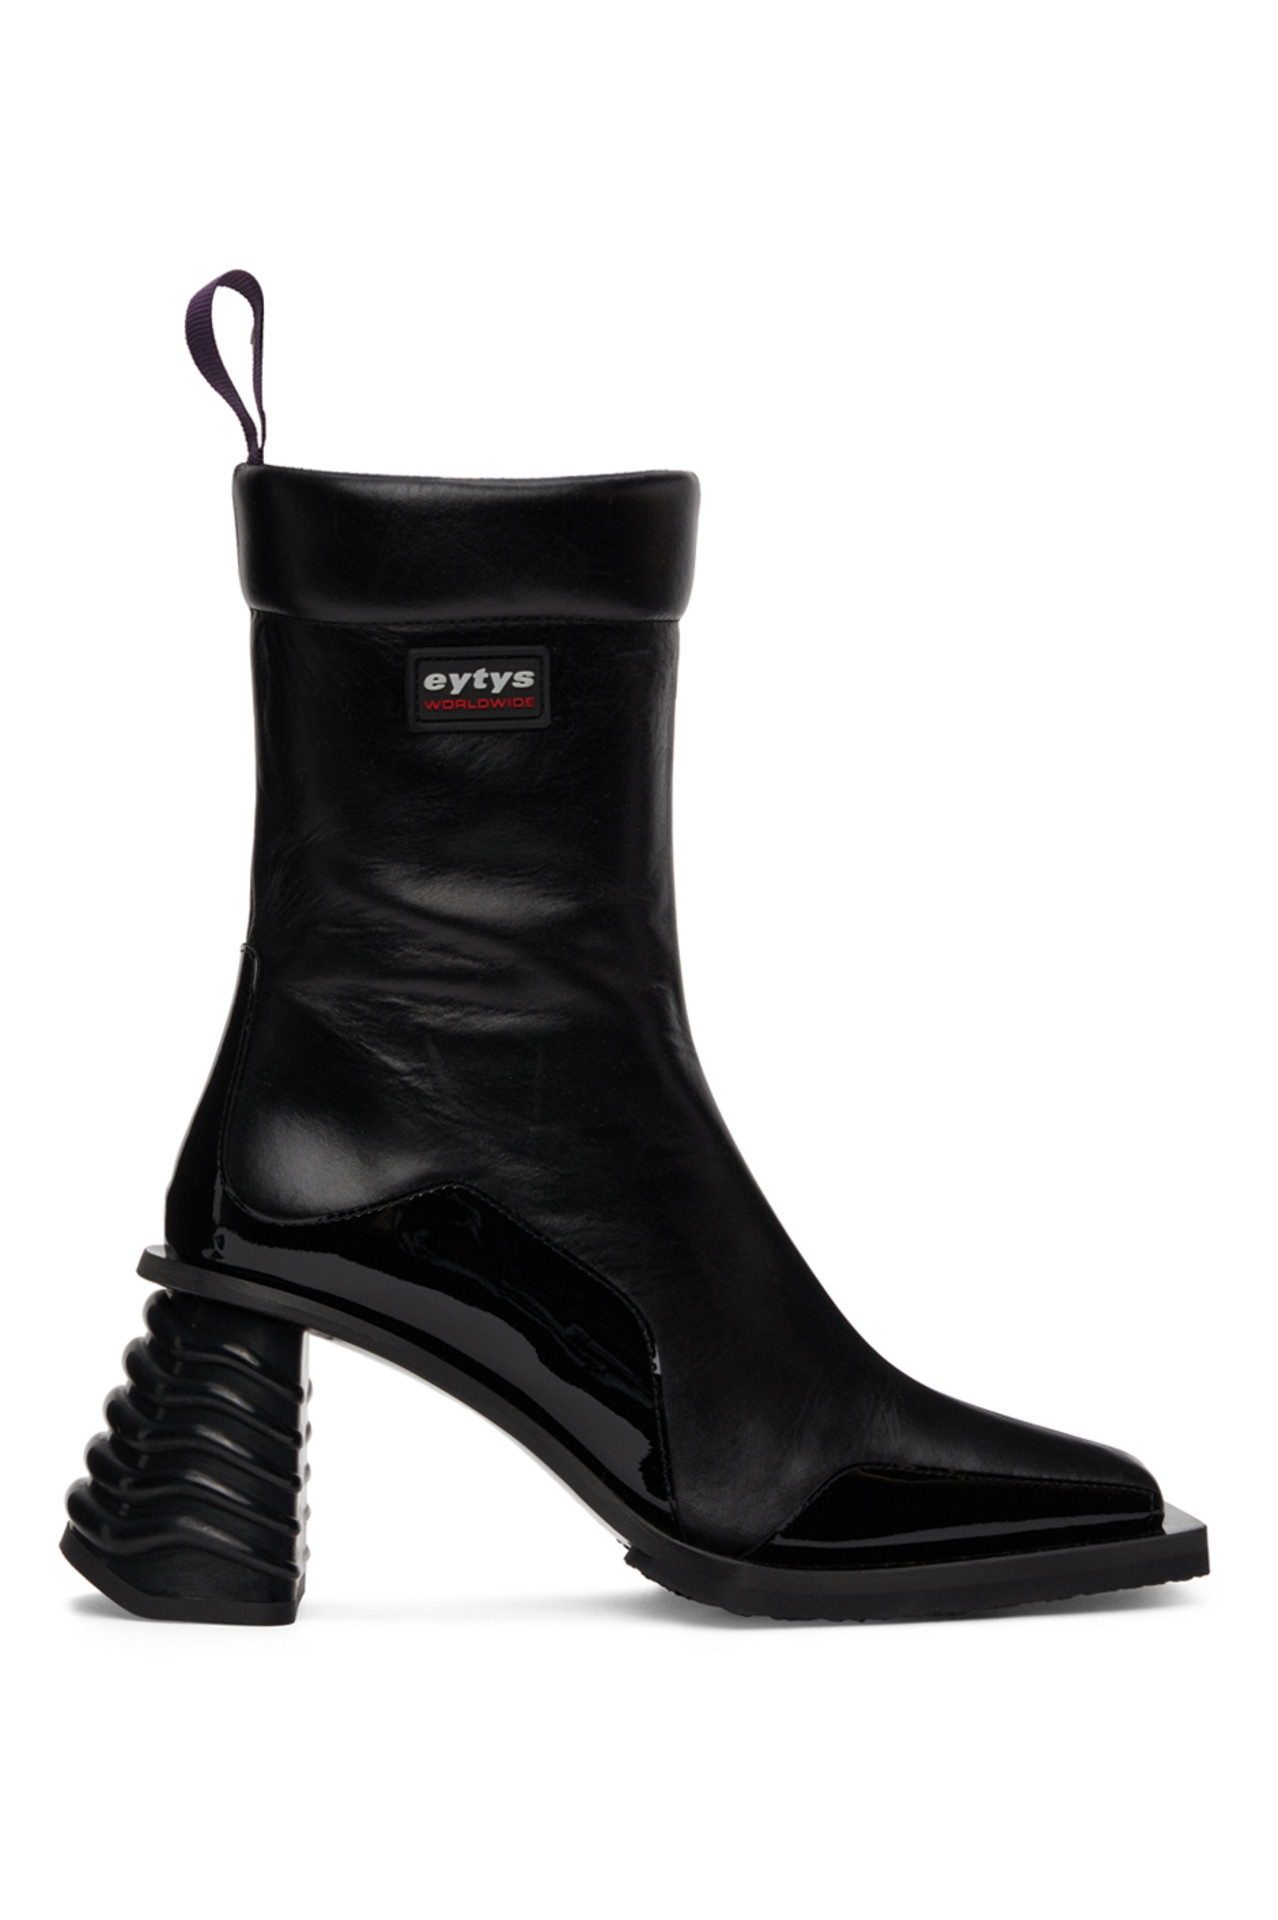 Black Boots For All and Any Occasion - V Magazine